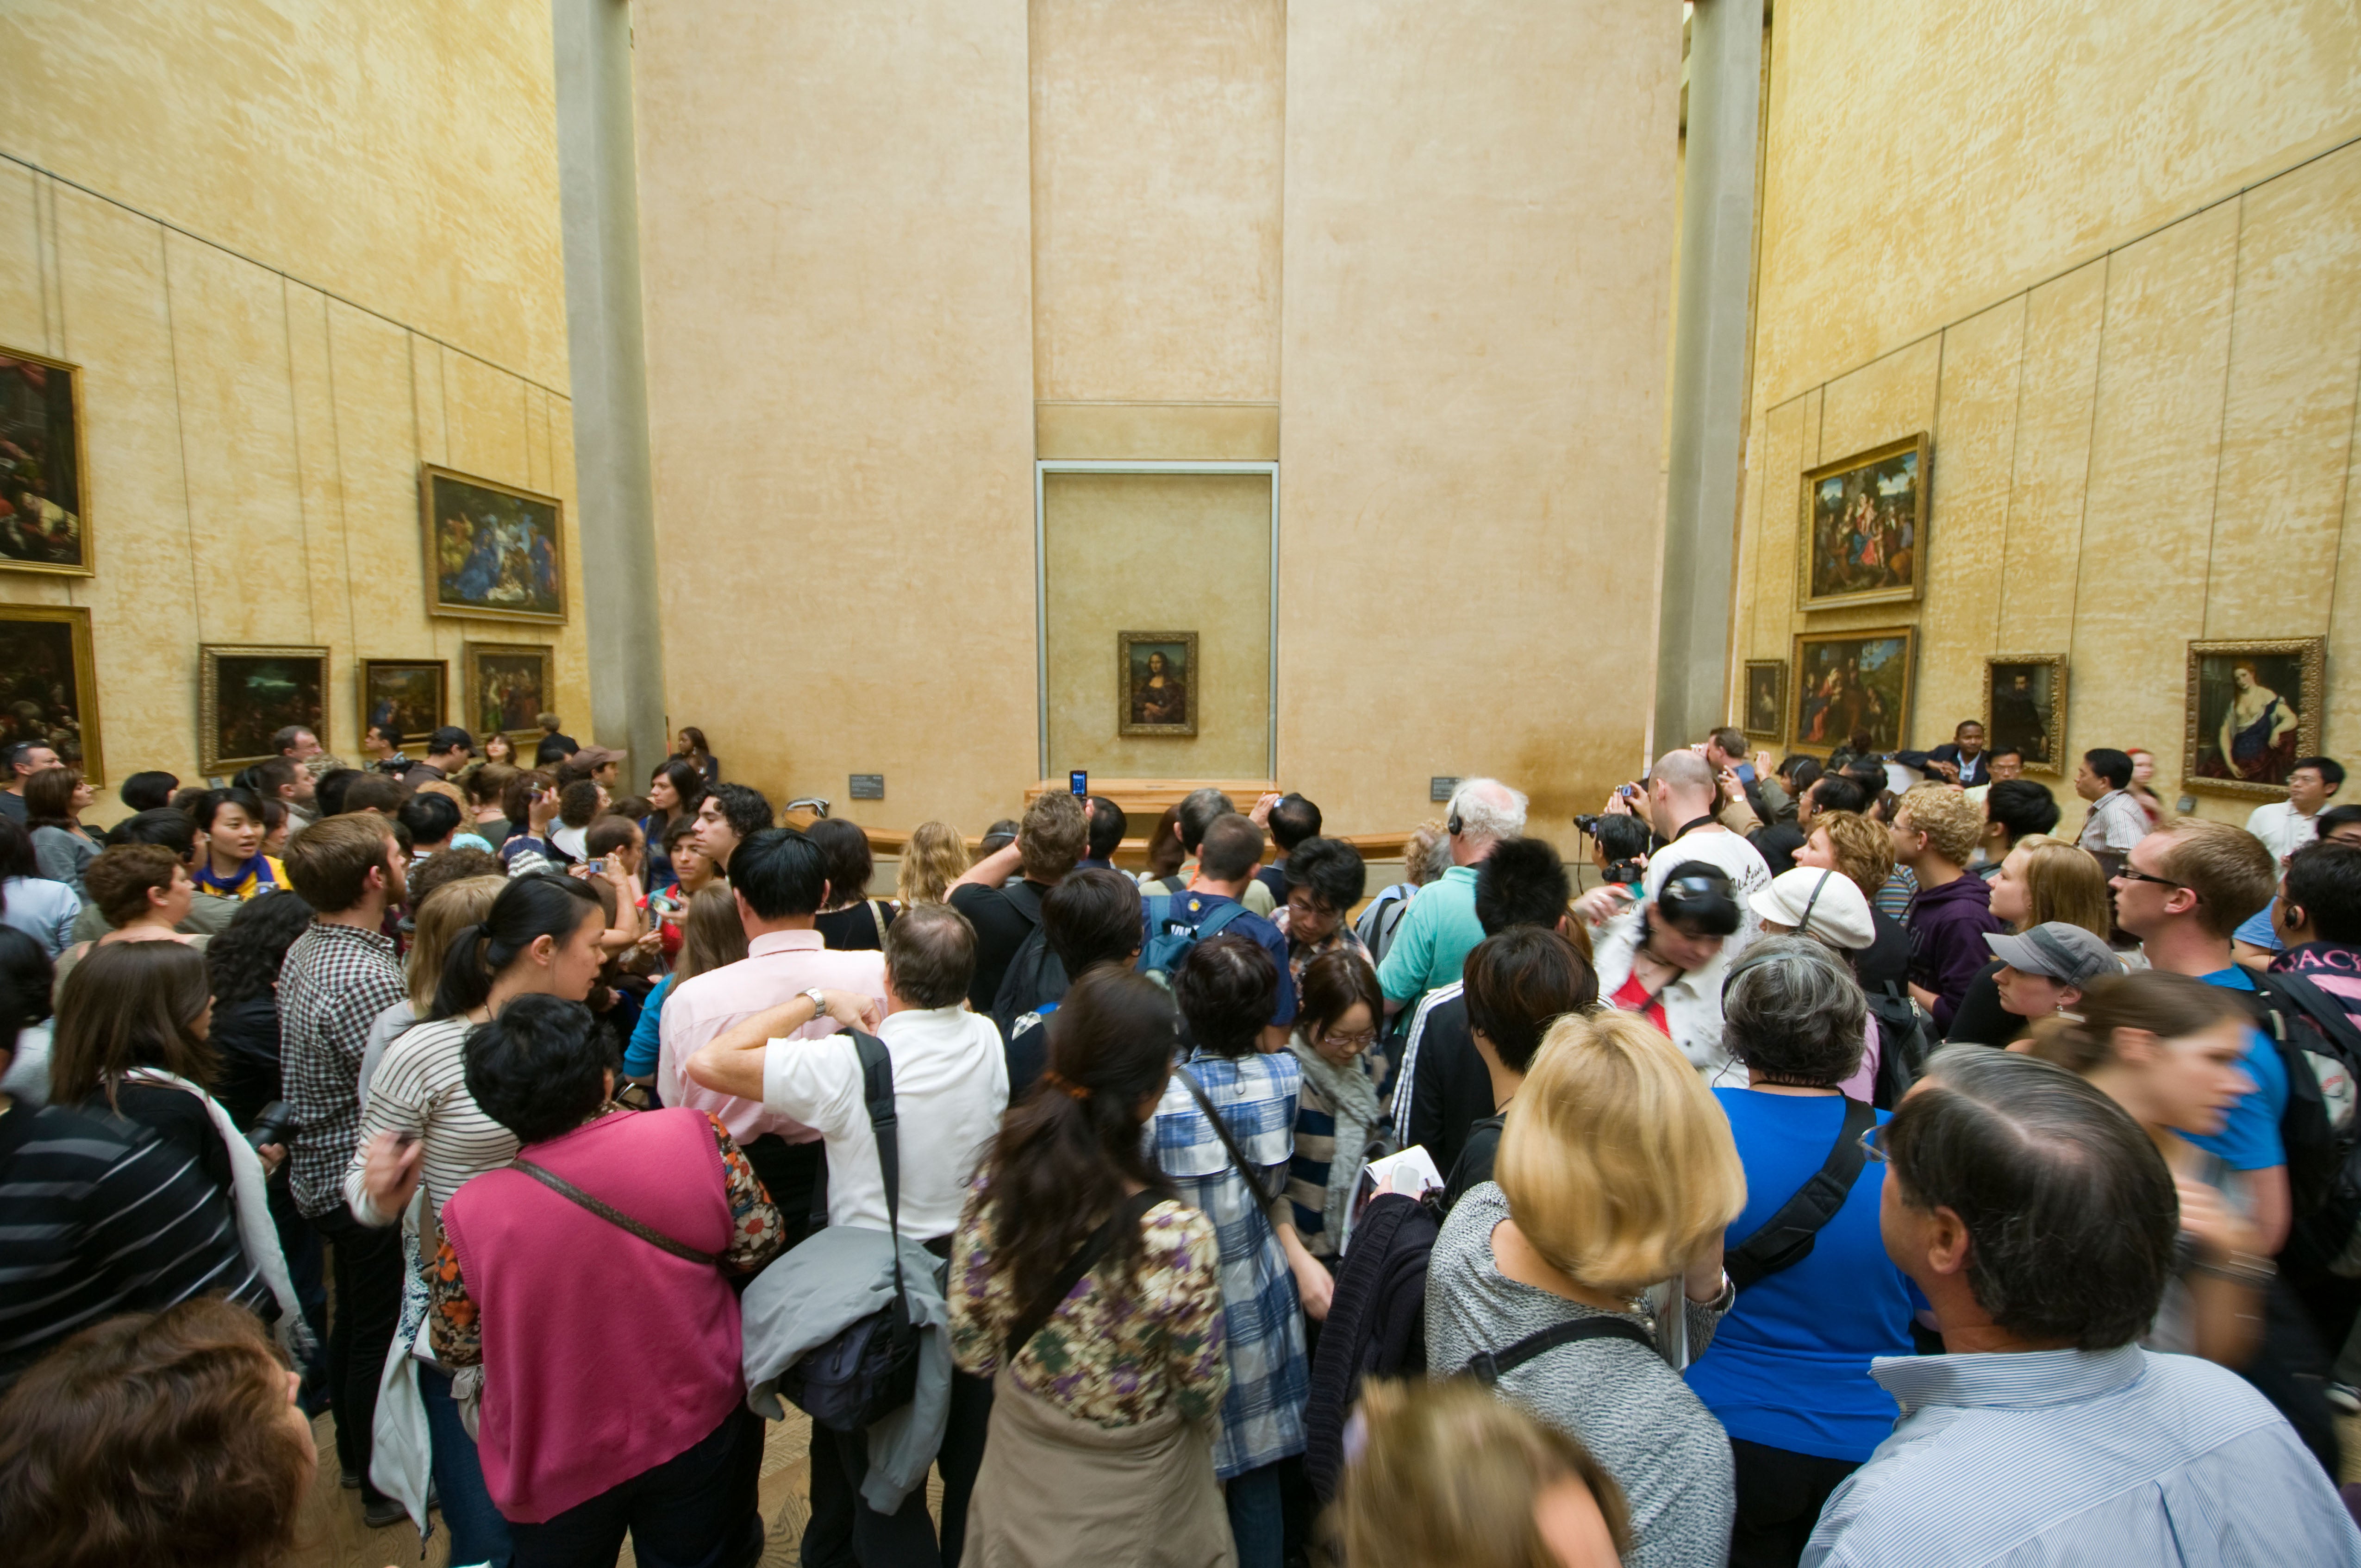 The Mona Lisa by Leonardo da Vinci on display at the Louvre in Paris. Hundreds of people gathered around to see the painting.